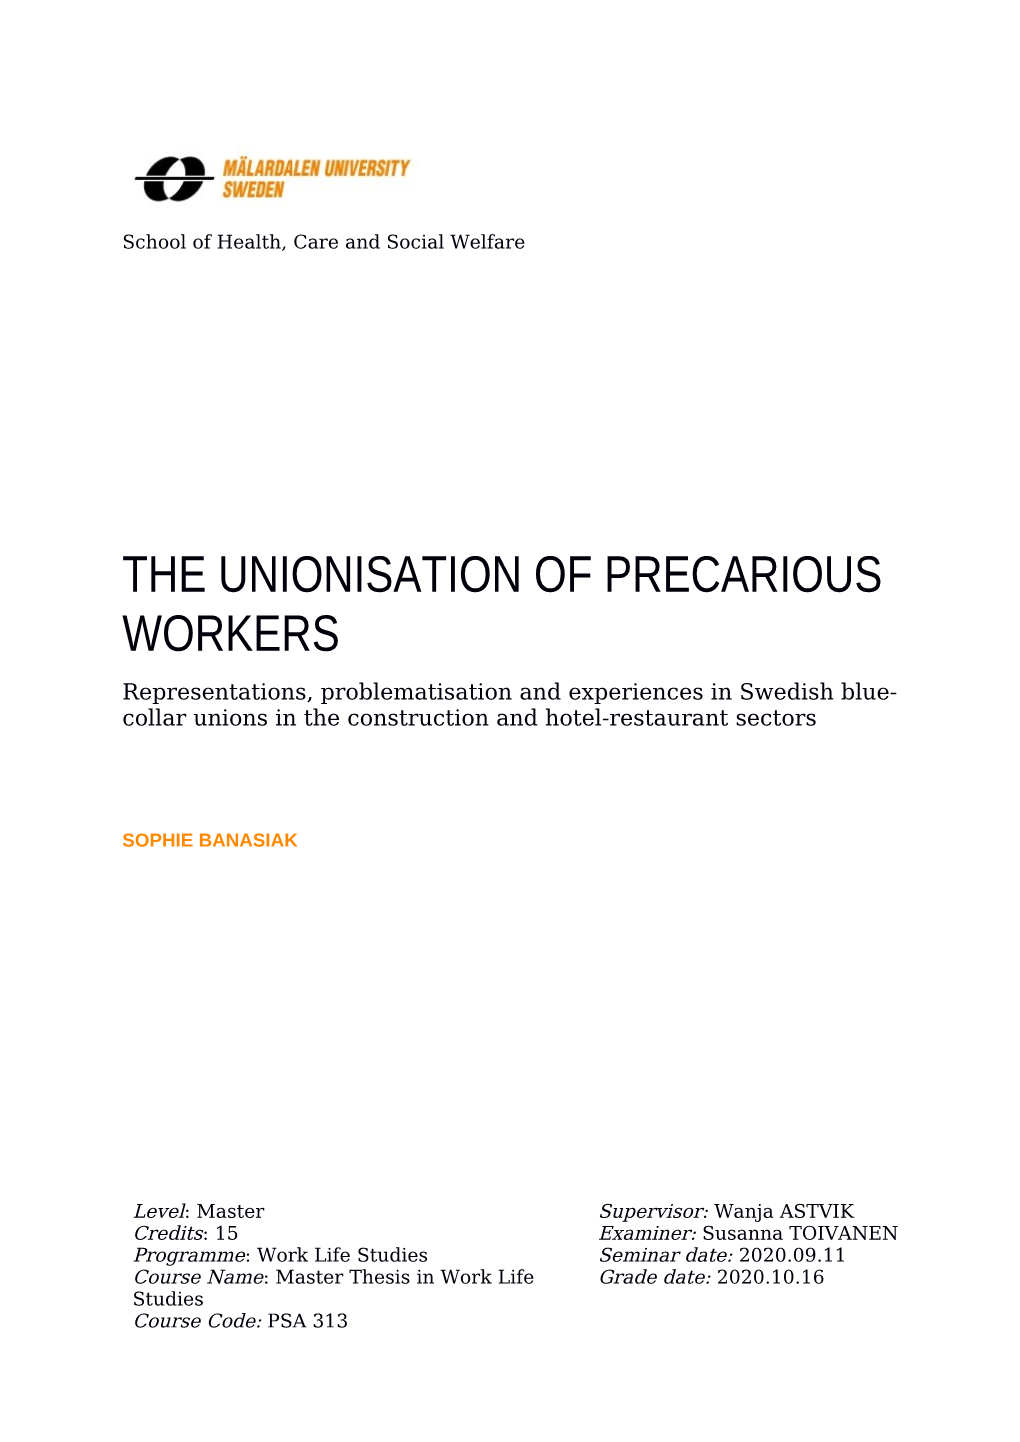 The Unionisation of Precarious Workers